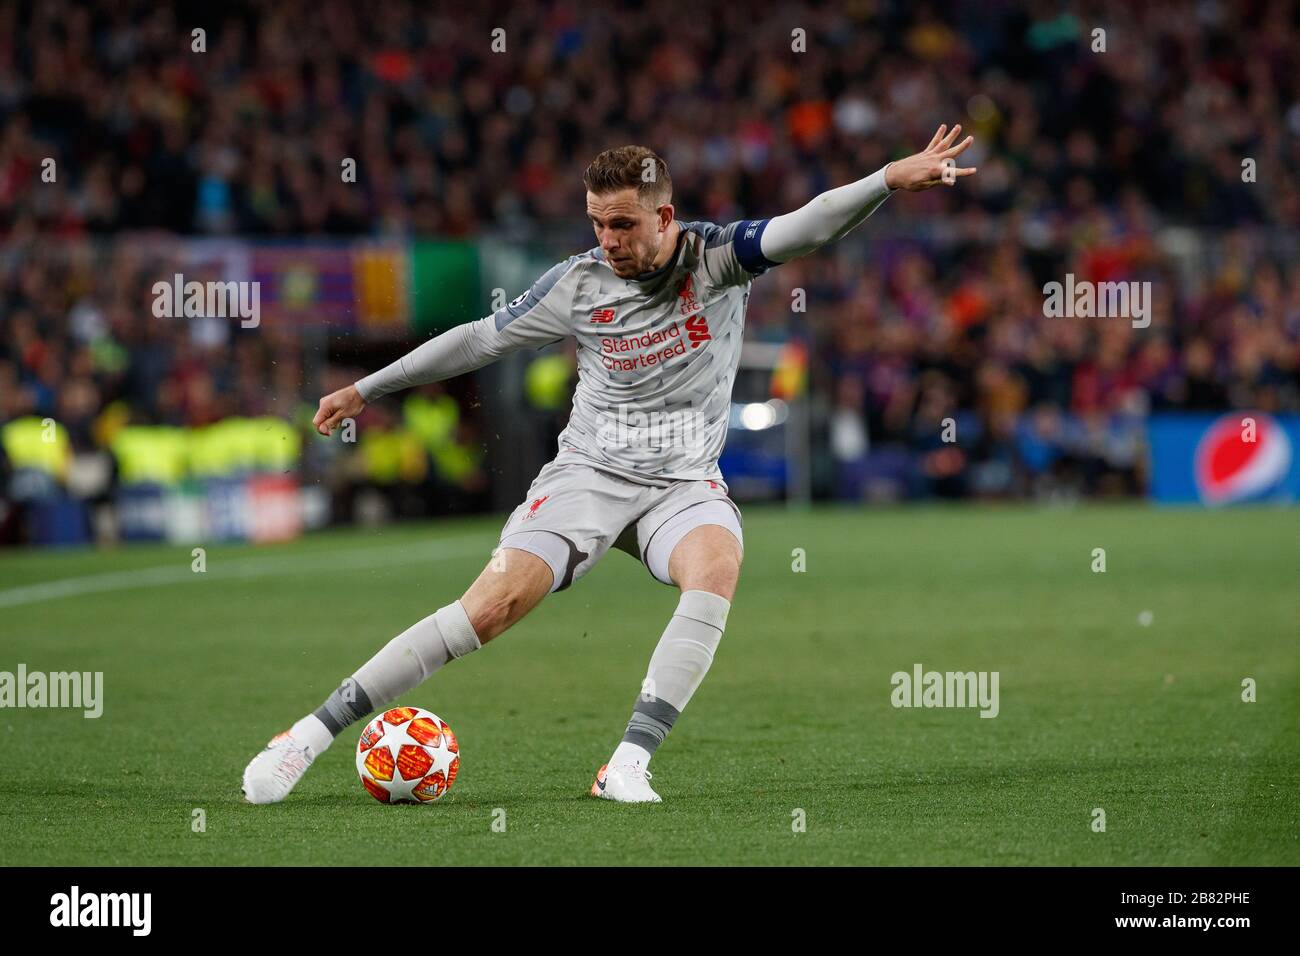 BARCELONA, SPAIN - MAY 01:  Jordan Henderson of Liverpool  during the UEFA Champions League Semi Final first leg match between FC Barcelona and Liverp Stock Photo